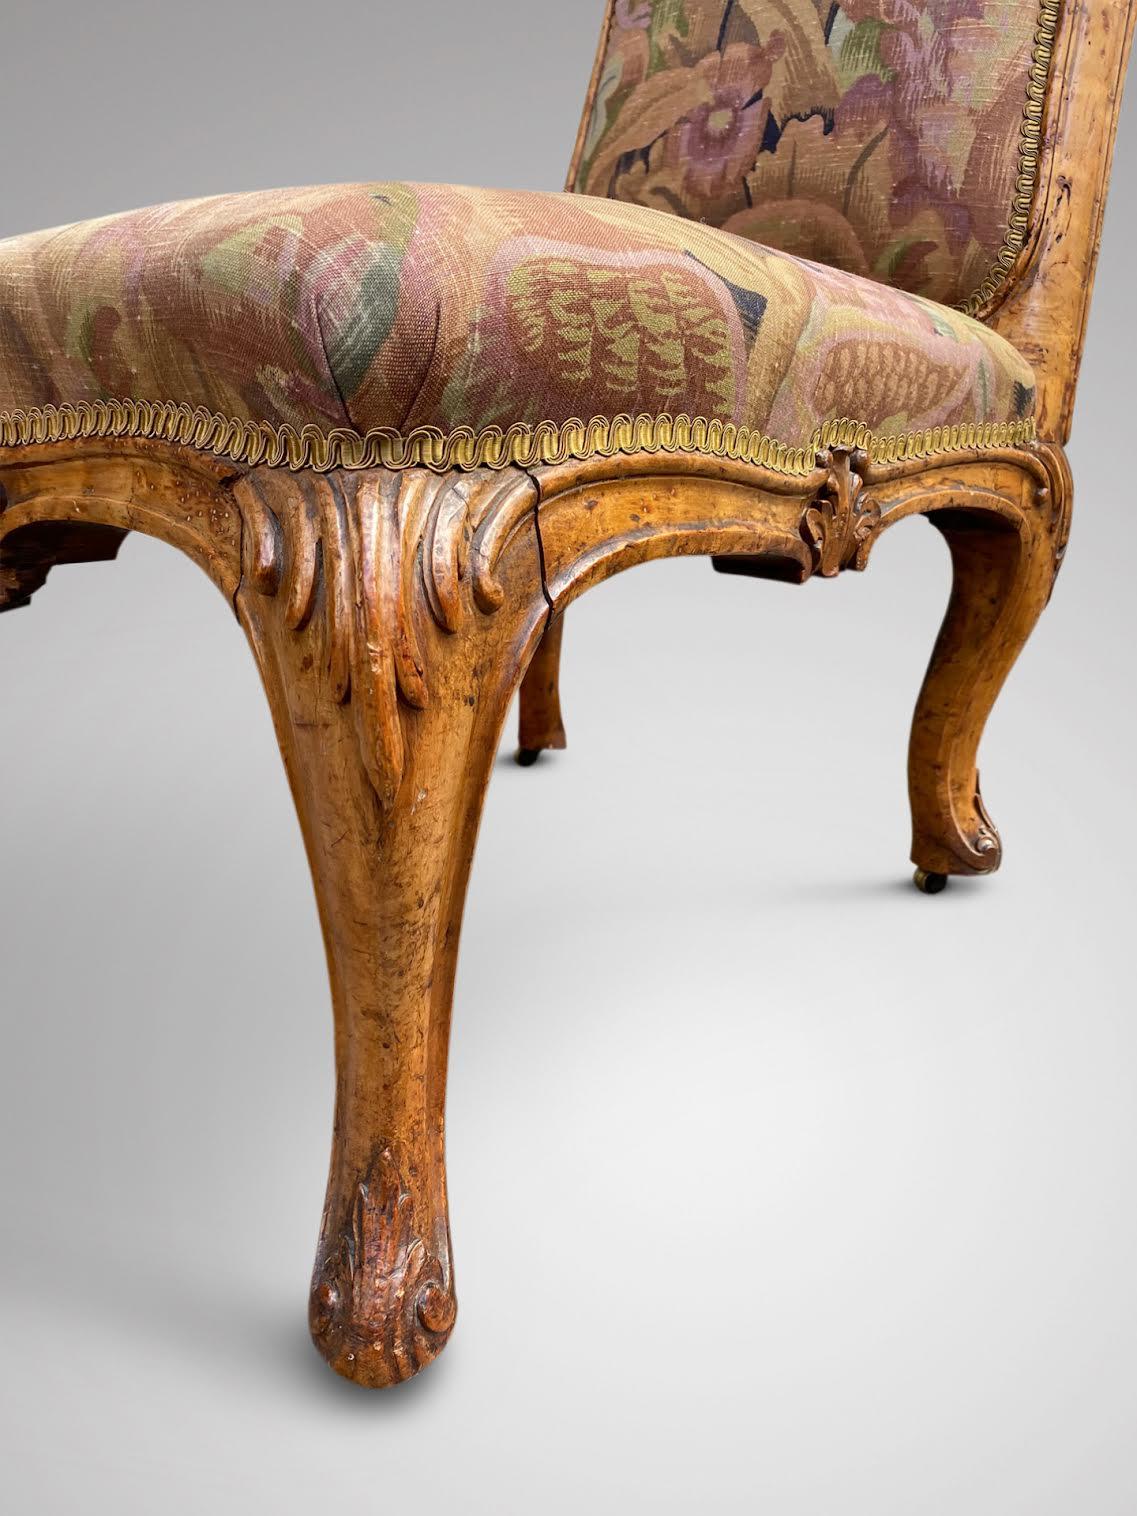 Hand-Carved Stunning Mid 19th Century Burr Elm Nursing Chair For Sale